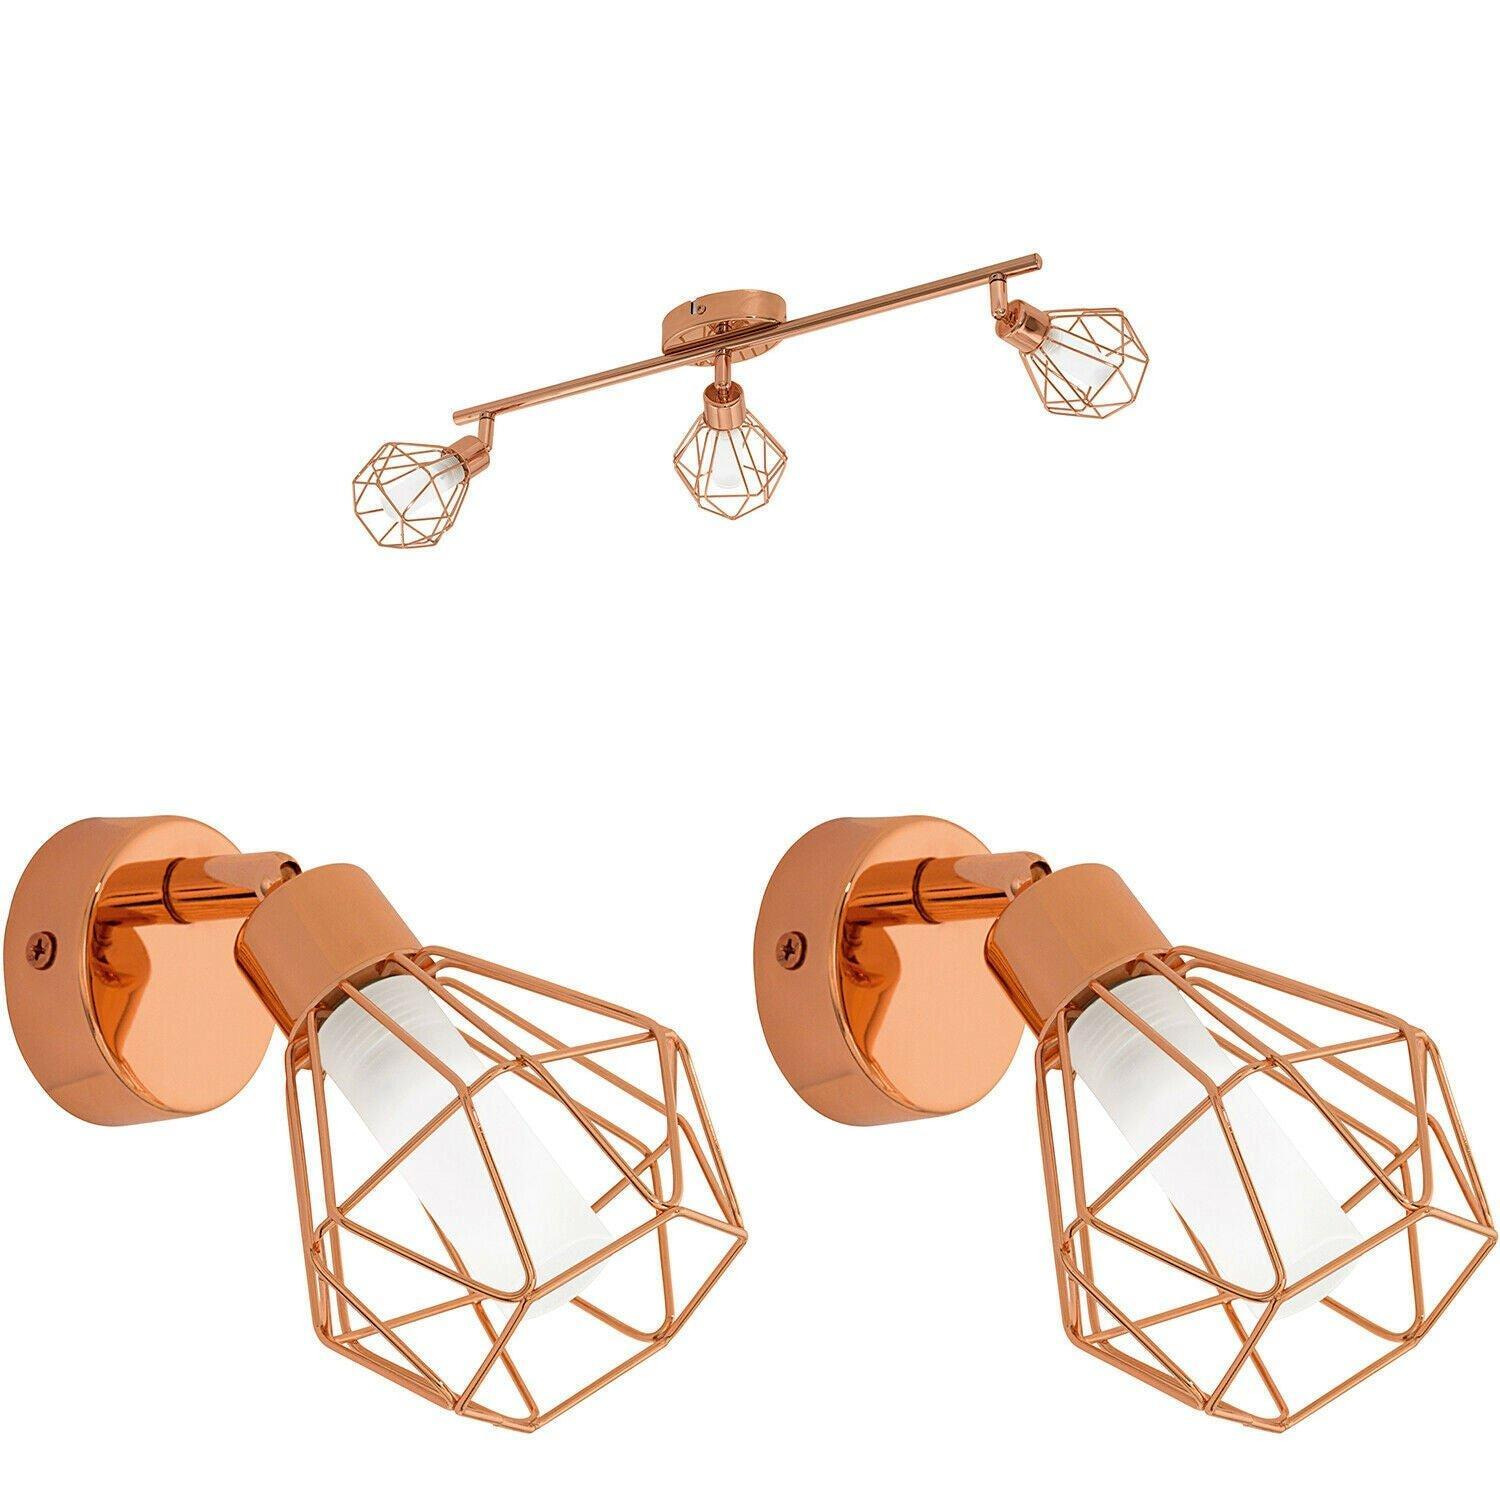 Ceiling Spot Light & 2x Matching Wall Lights Copper Geometric Wire Cage Shade - image 1